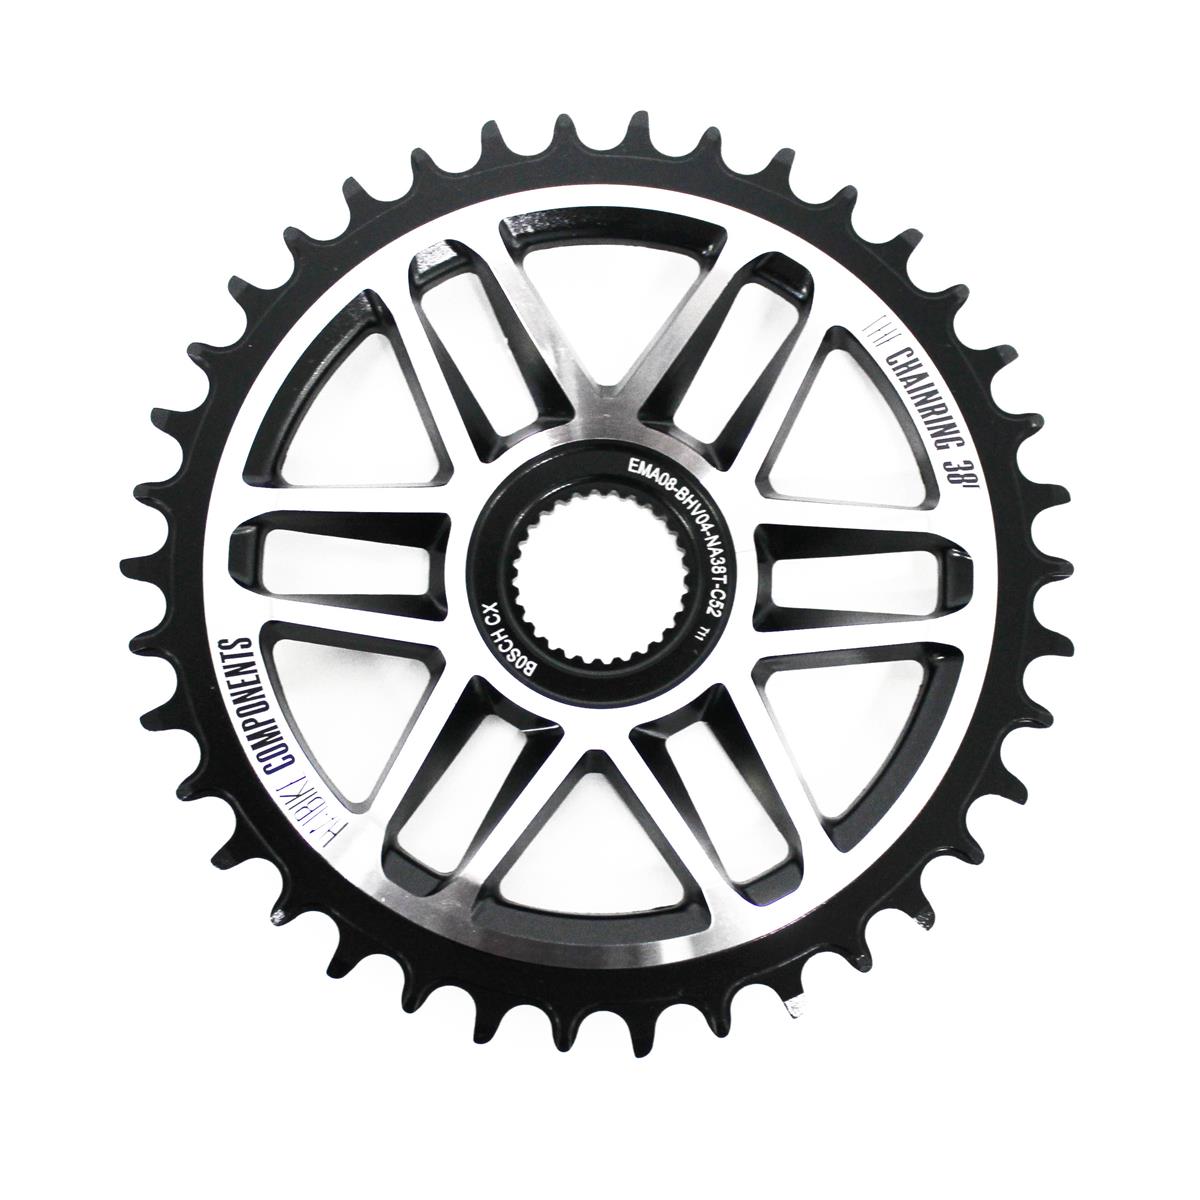 The Chainring 38t direct mount 12v for models with Bosch Gen4 engine from 2020